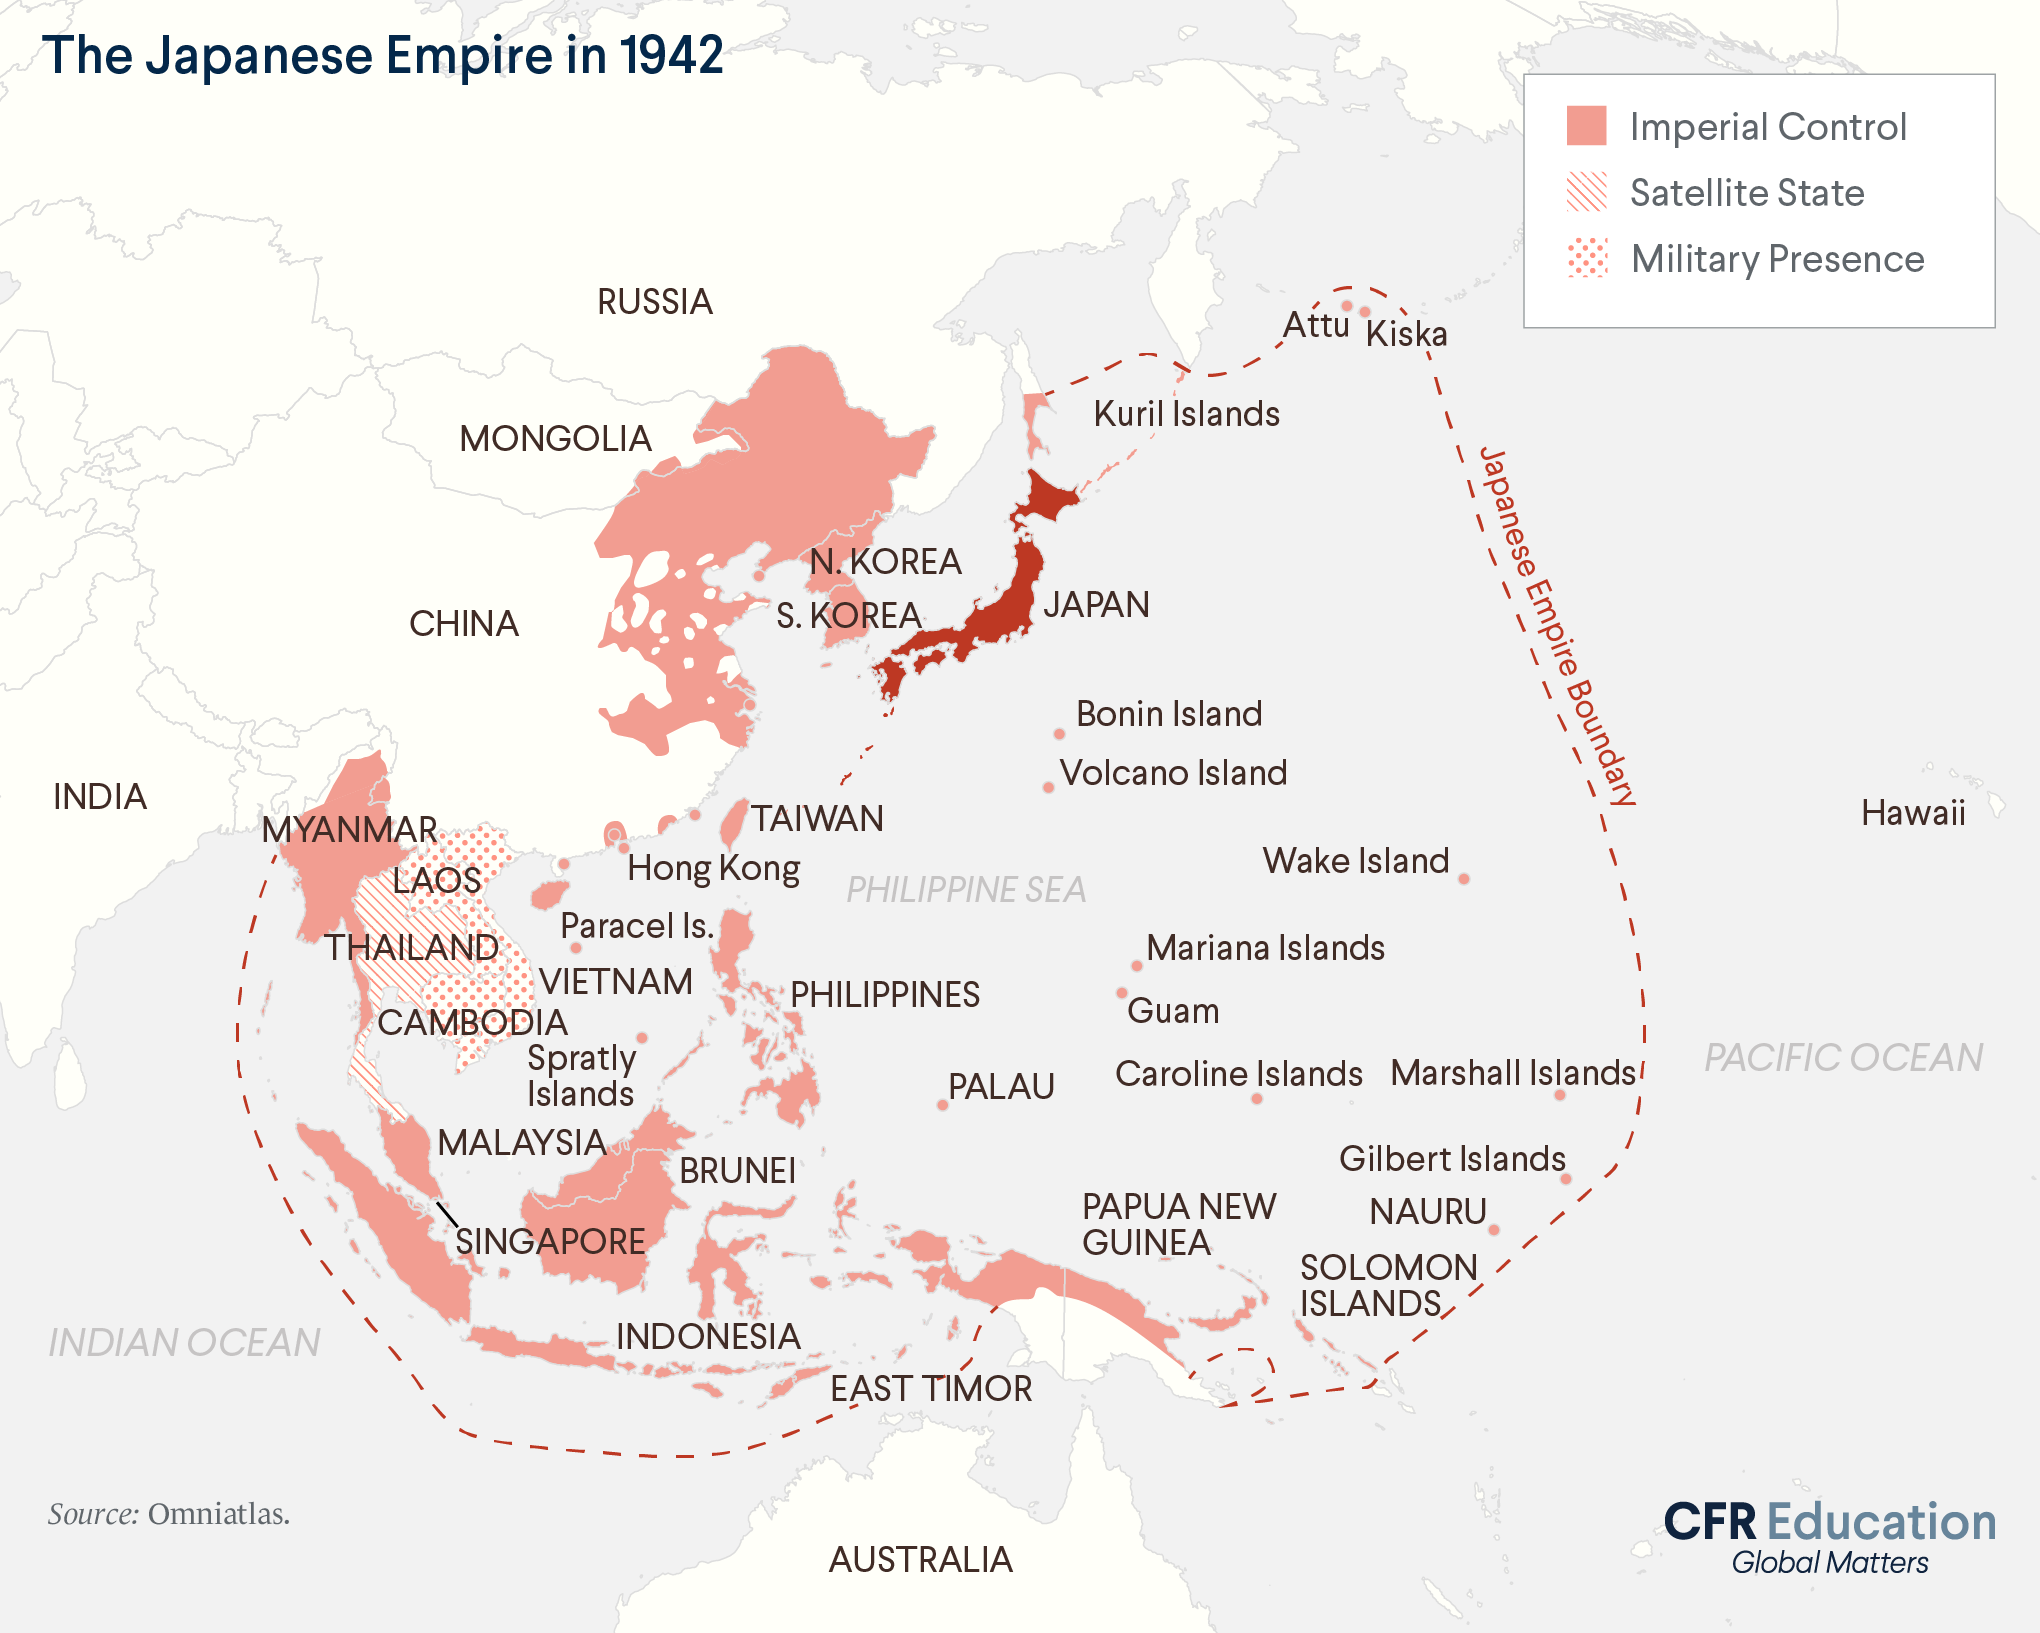 Map depicts the Japanese Empire in 1942, including areas under imperial control, satellite states, areas with a Japanese military presence. Source: Omniatlas. For more info contact us at cfr_education@cfr.org.